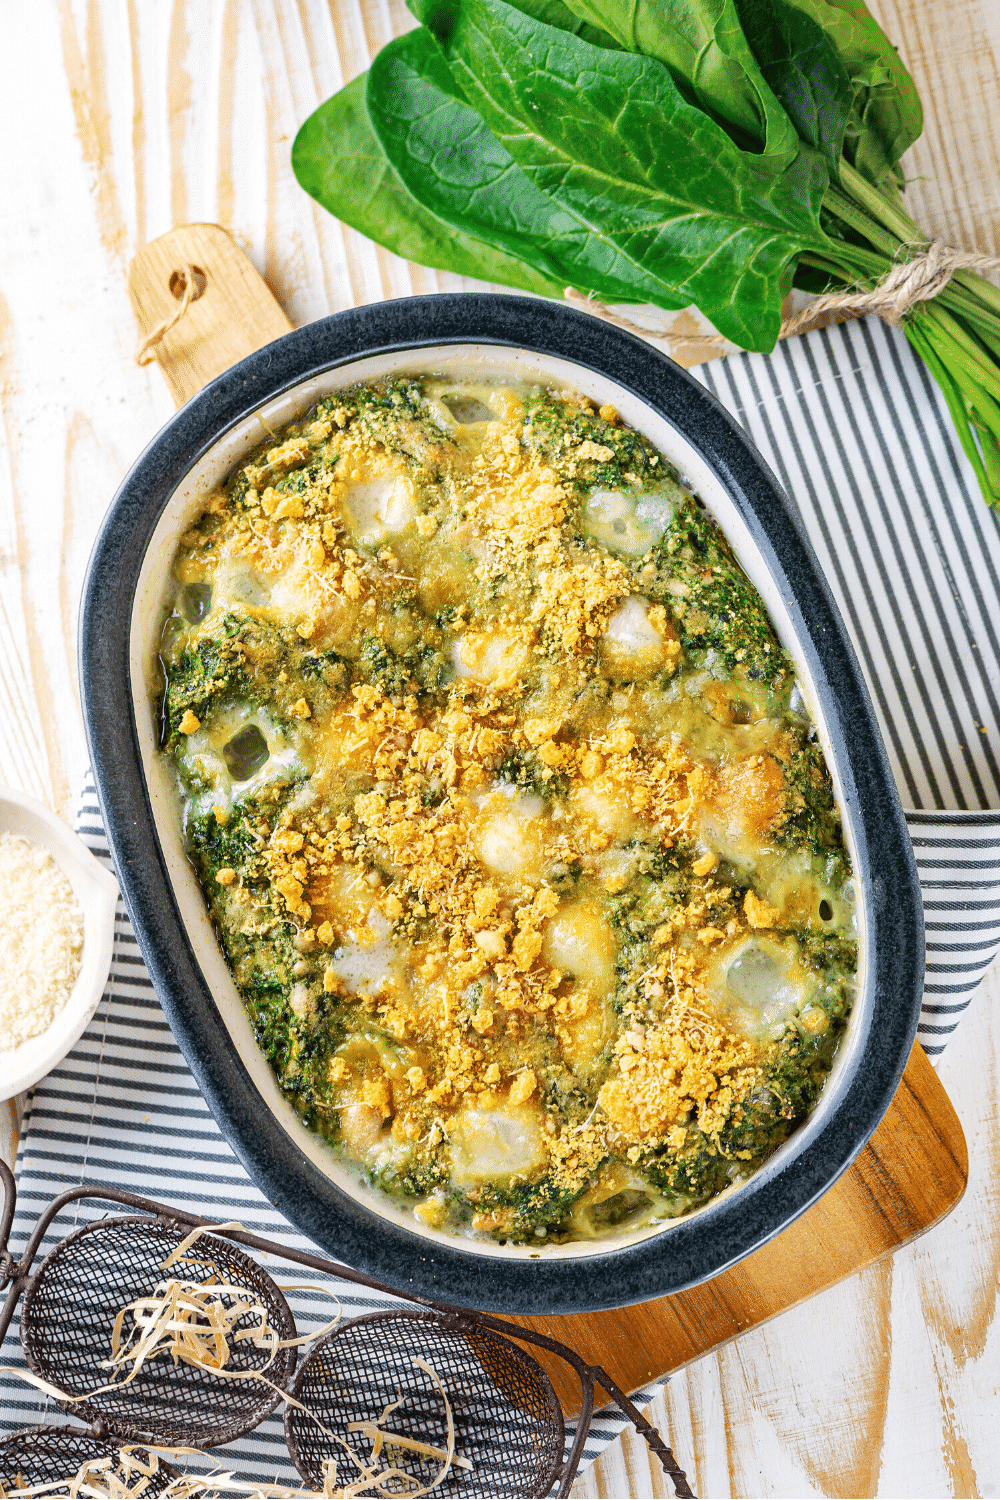 A baking dish filled with cheesy spinach casserole. The baking dish is on a wooden cutting board on a white and blue stripped tablecloth. A bundle of spinach is to the back right of the spinach casserole.